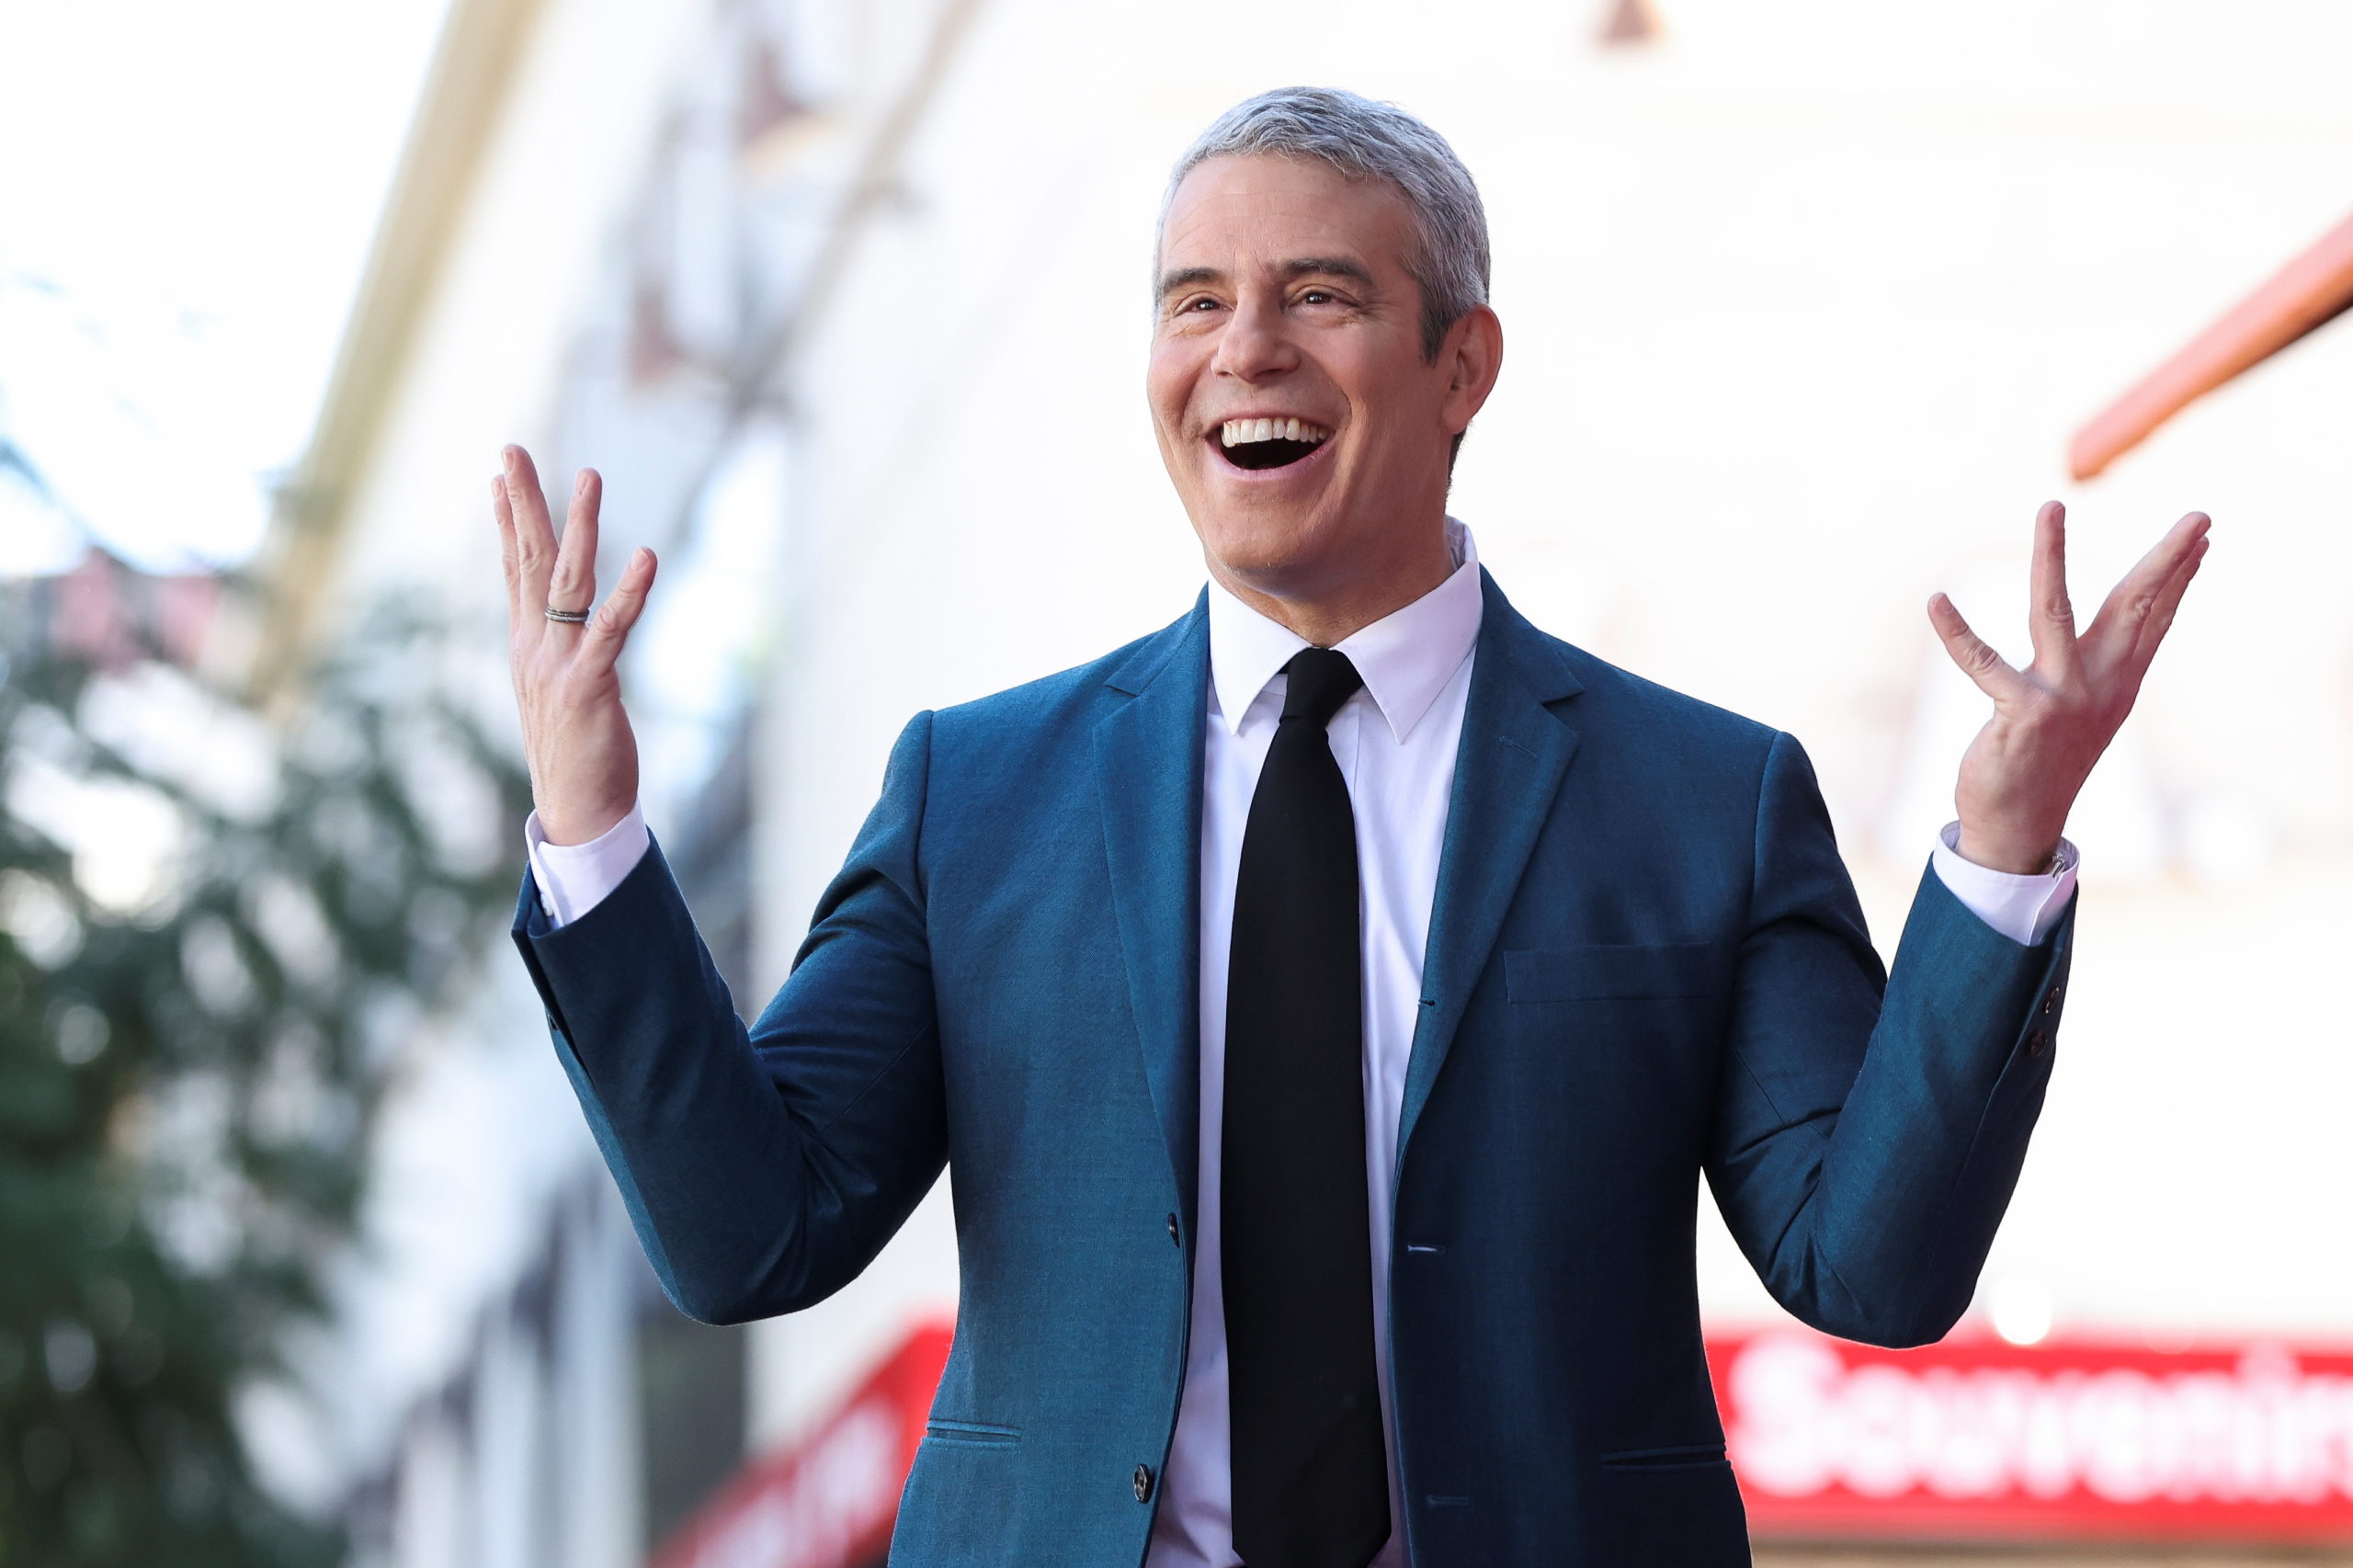 Television host Andy Cohen reacts prior to unveiling of his star on the Hollywood Walk of Fame in Los Angeles, California, U.S., February 4, 2022. REUTERS/Mario Anzuoni